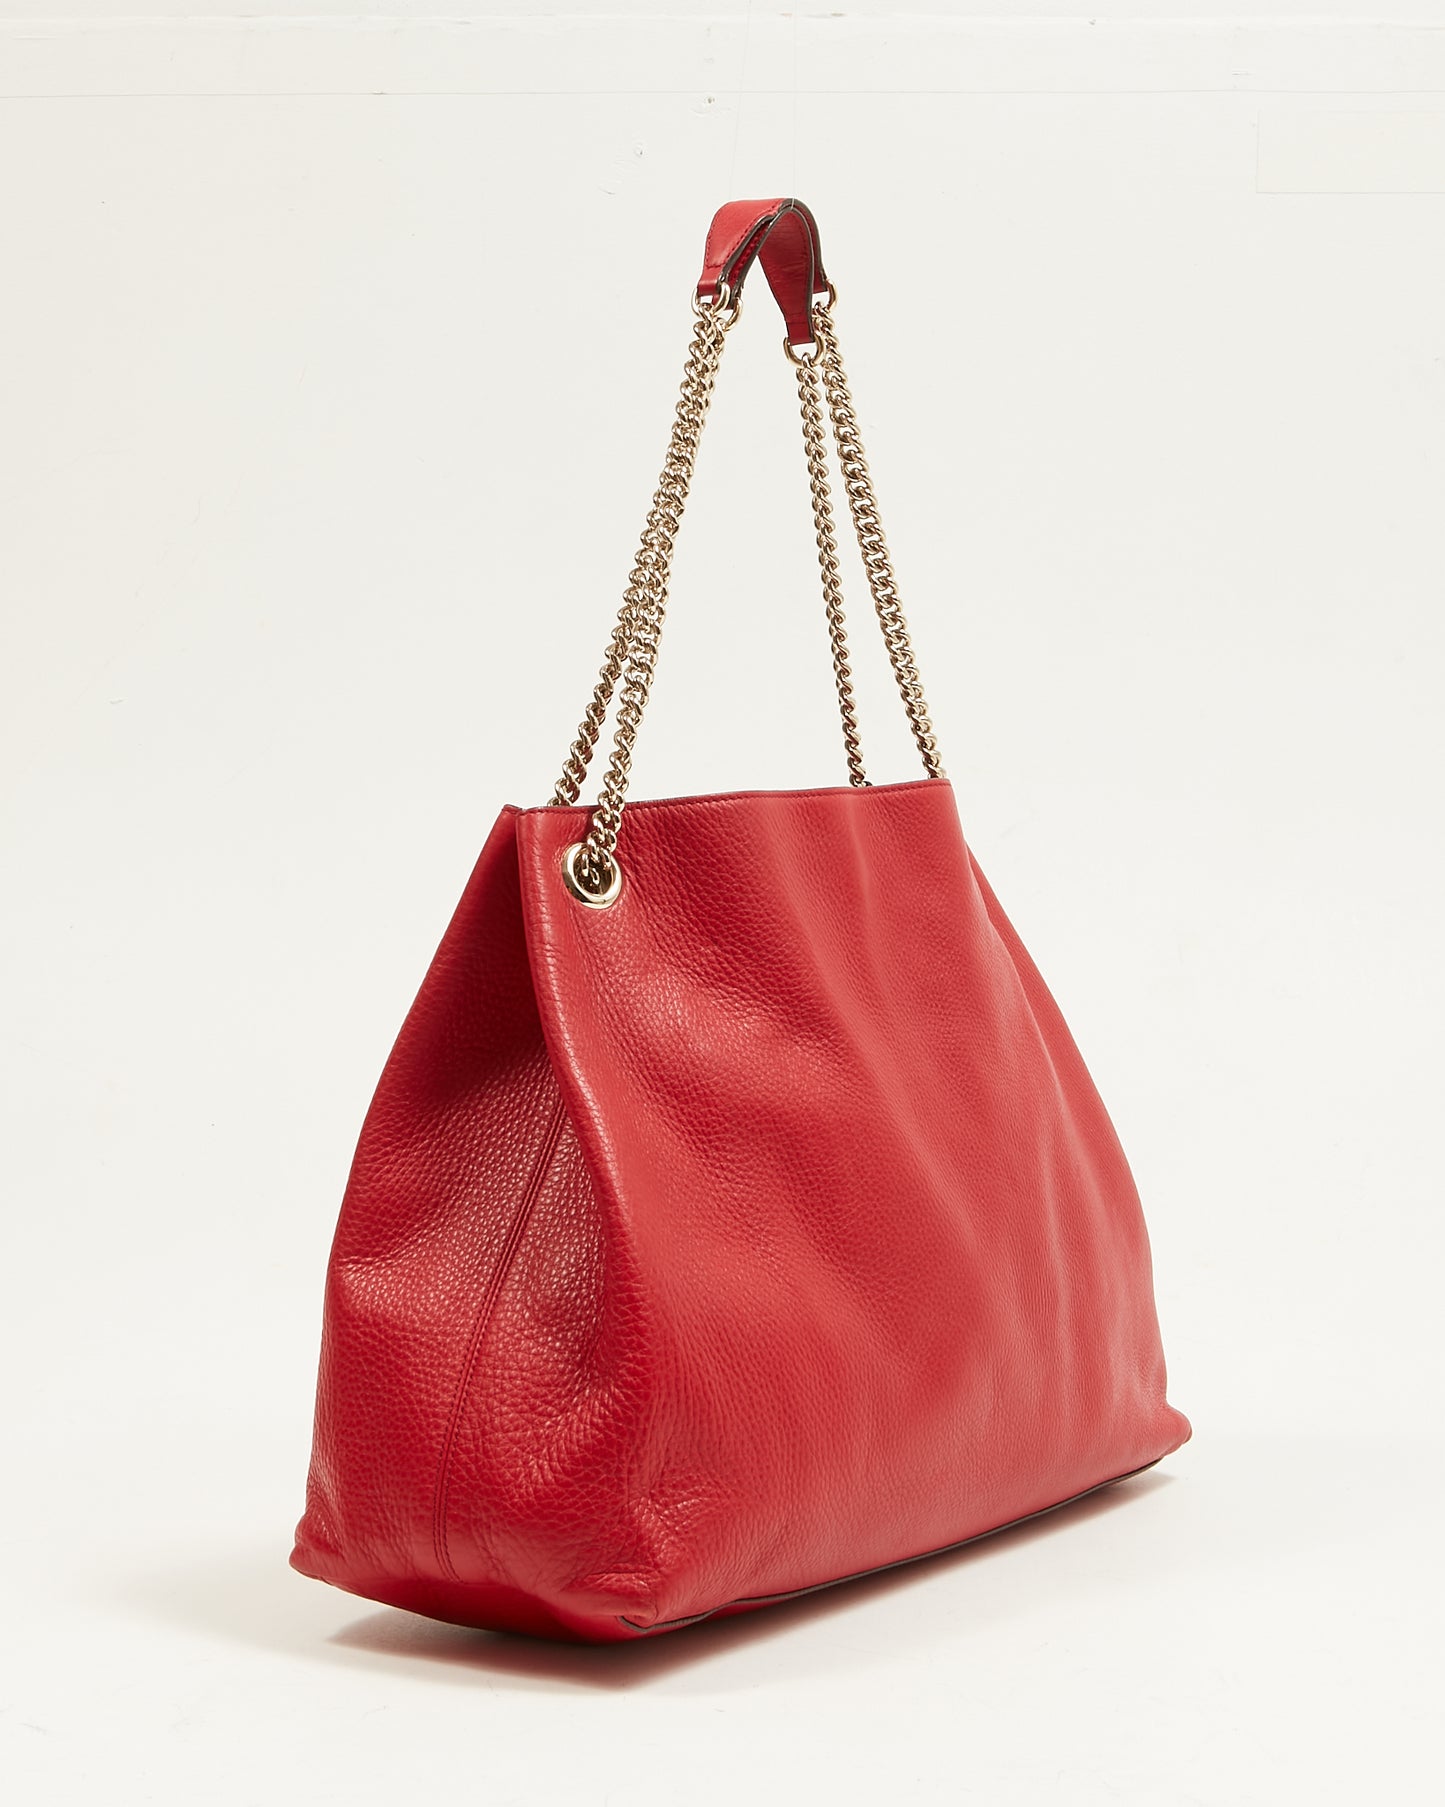 Gucci Red Pebbled Leather Large Soho Chain Shoulder Tote Bag